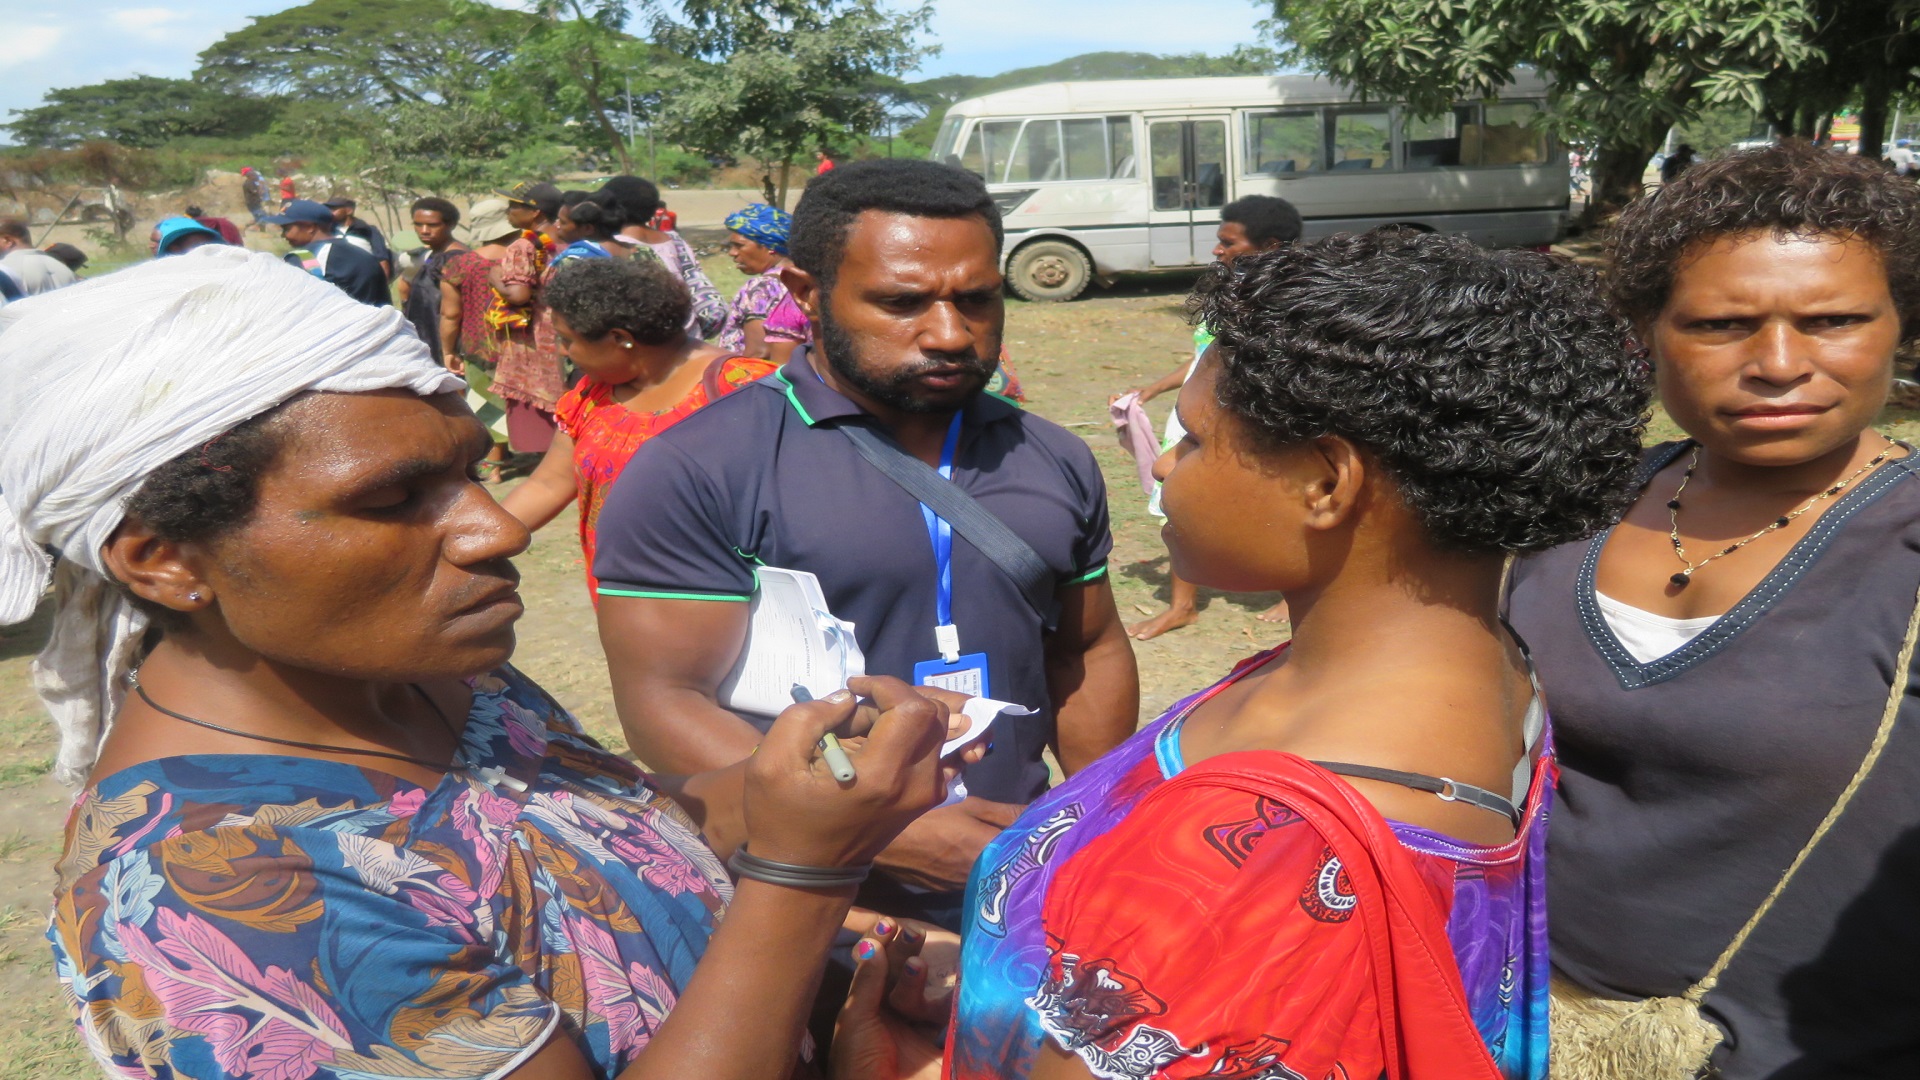 Voters discussing who to vote for at Waigani Police station